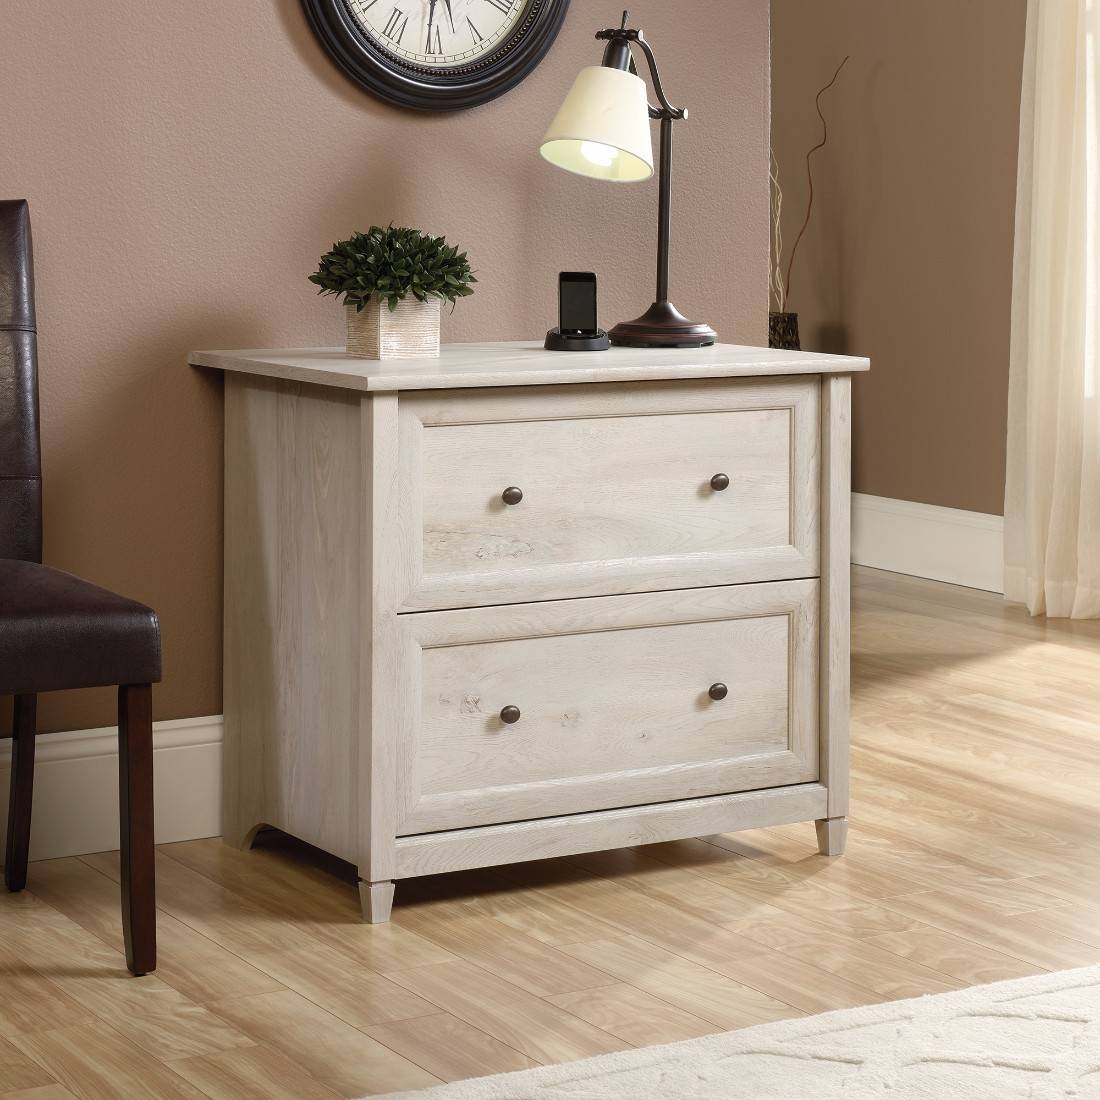 Edge Water Lateral File in Chalked Chestnut - Sauder 418796